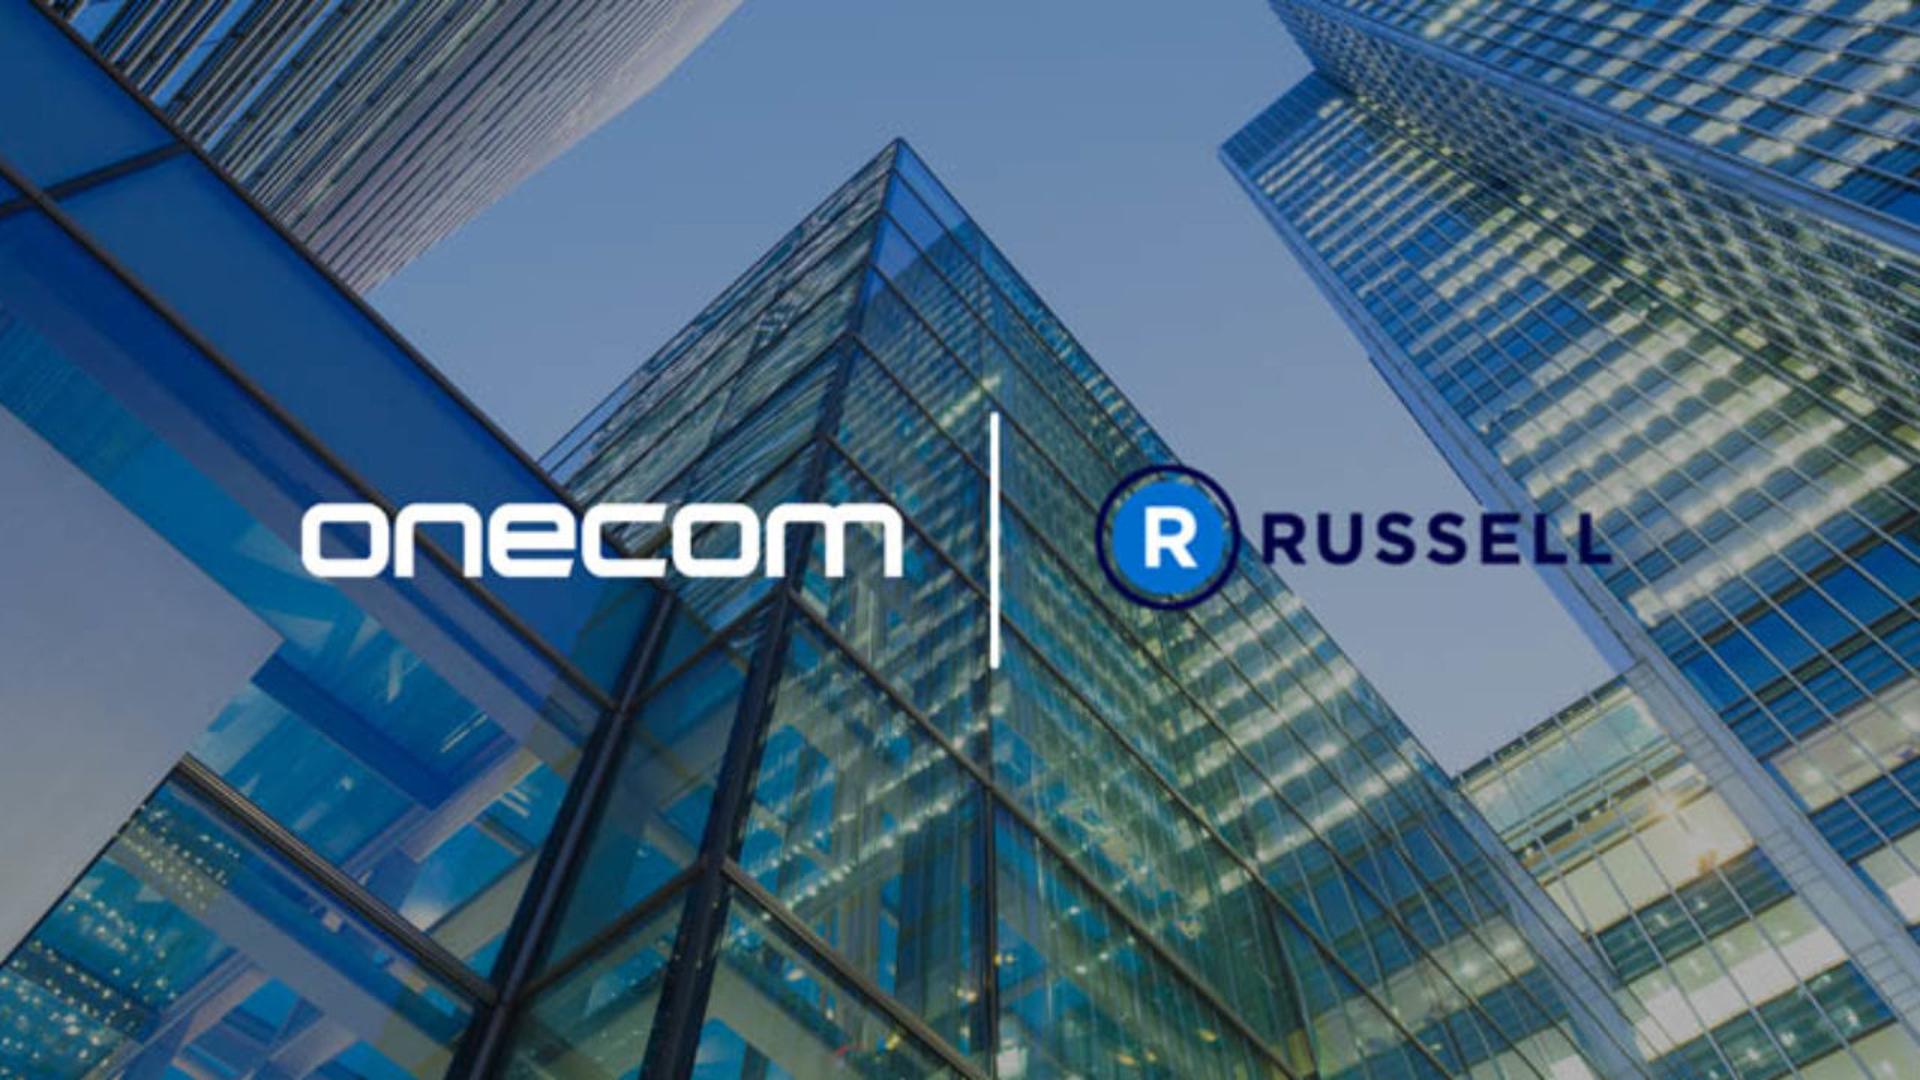 OneCom completes fourth deal of 2021 with Russell Telecom takeover